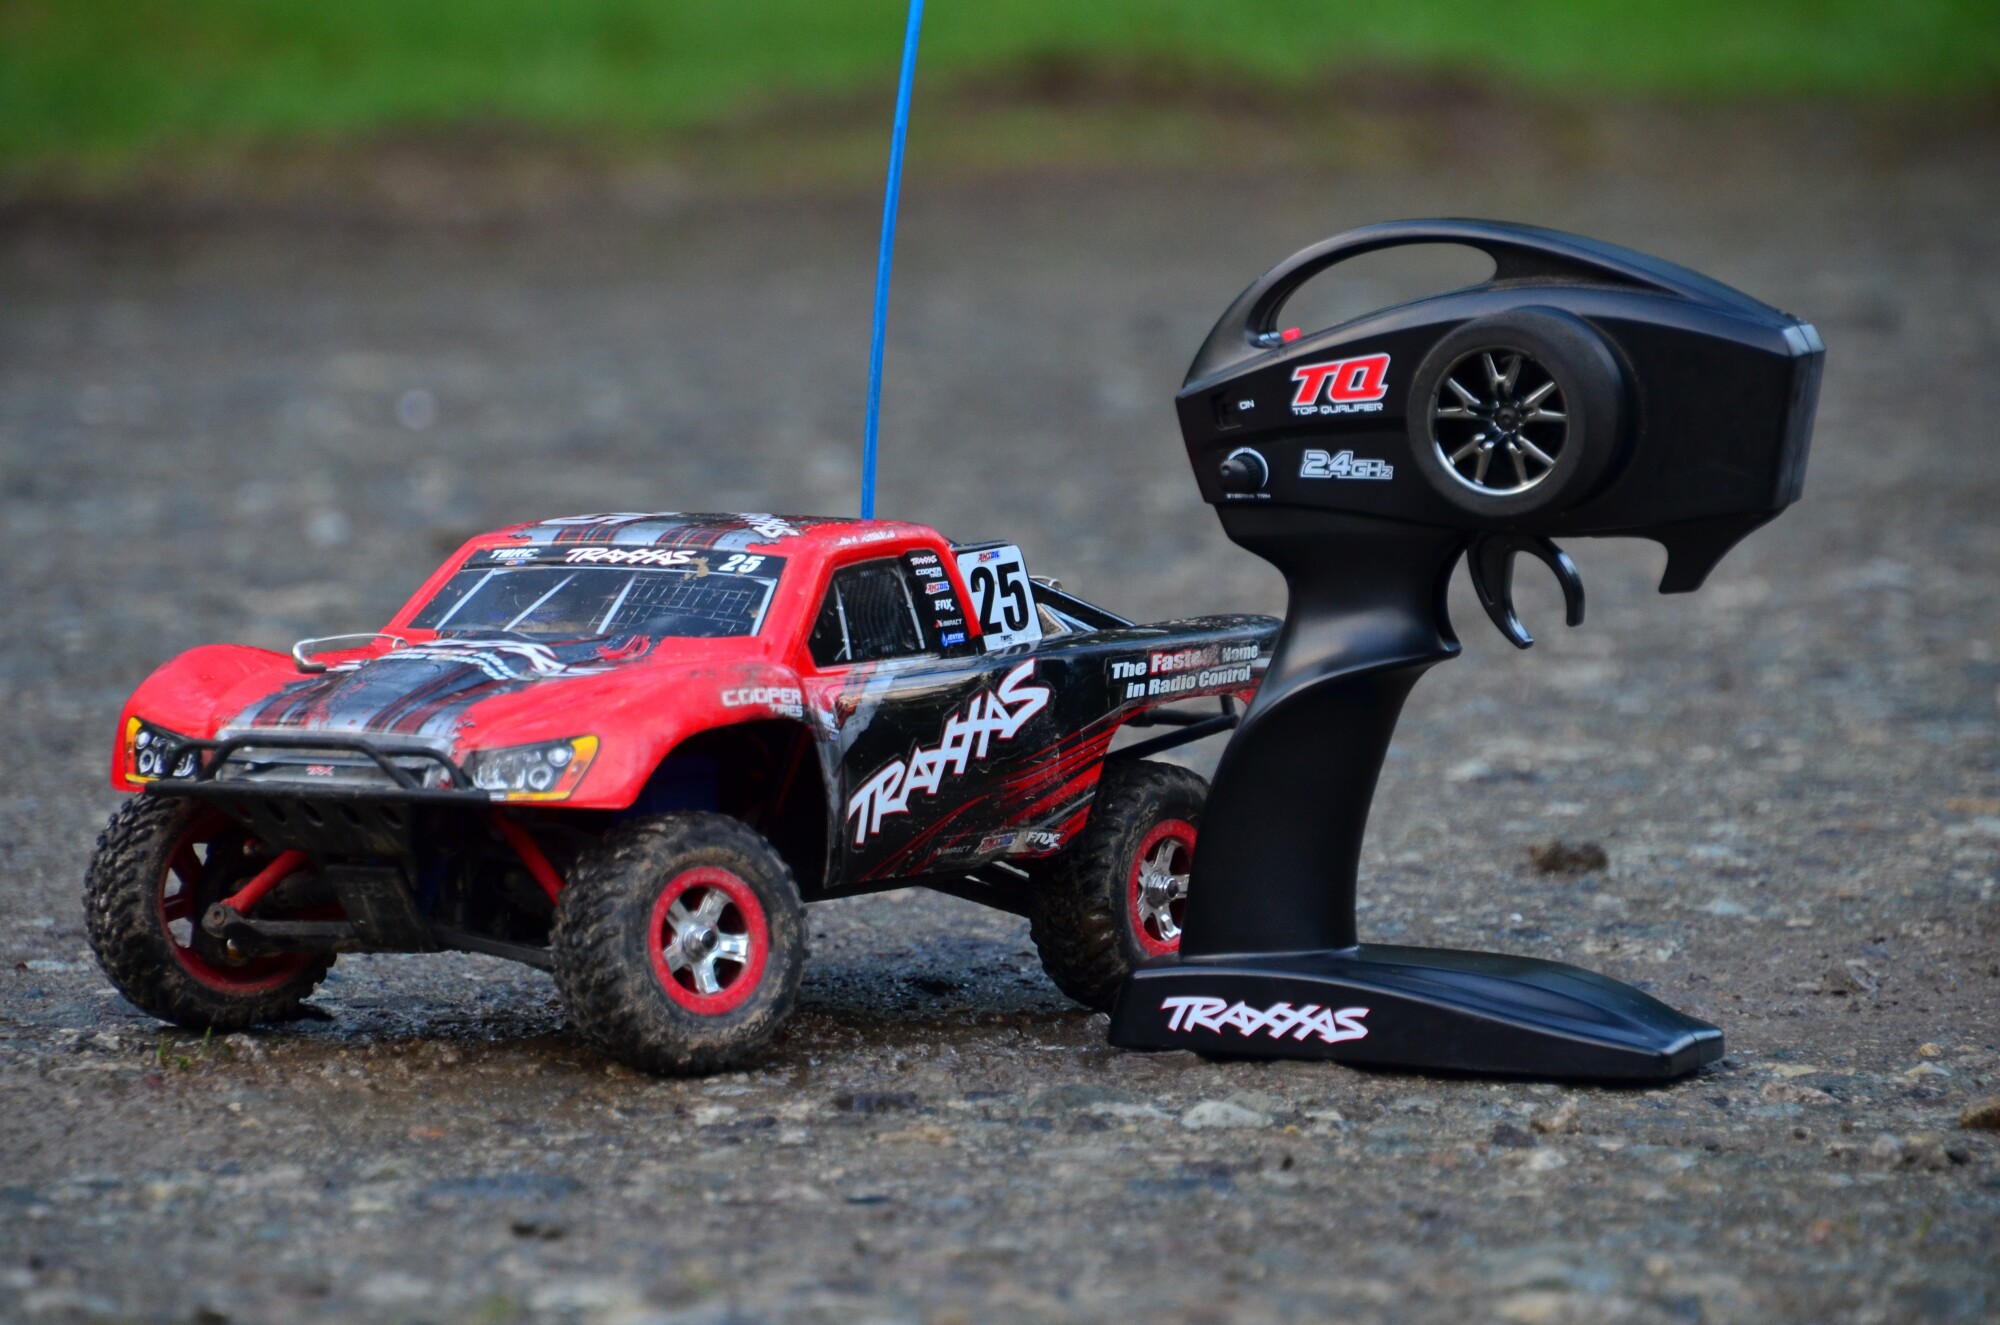 Best RC drift cars 2022: Discover the best remote control drift